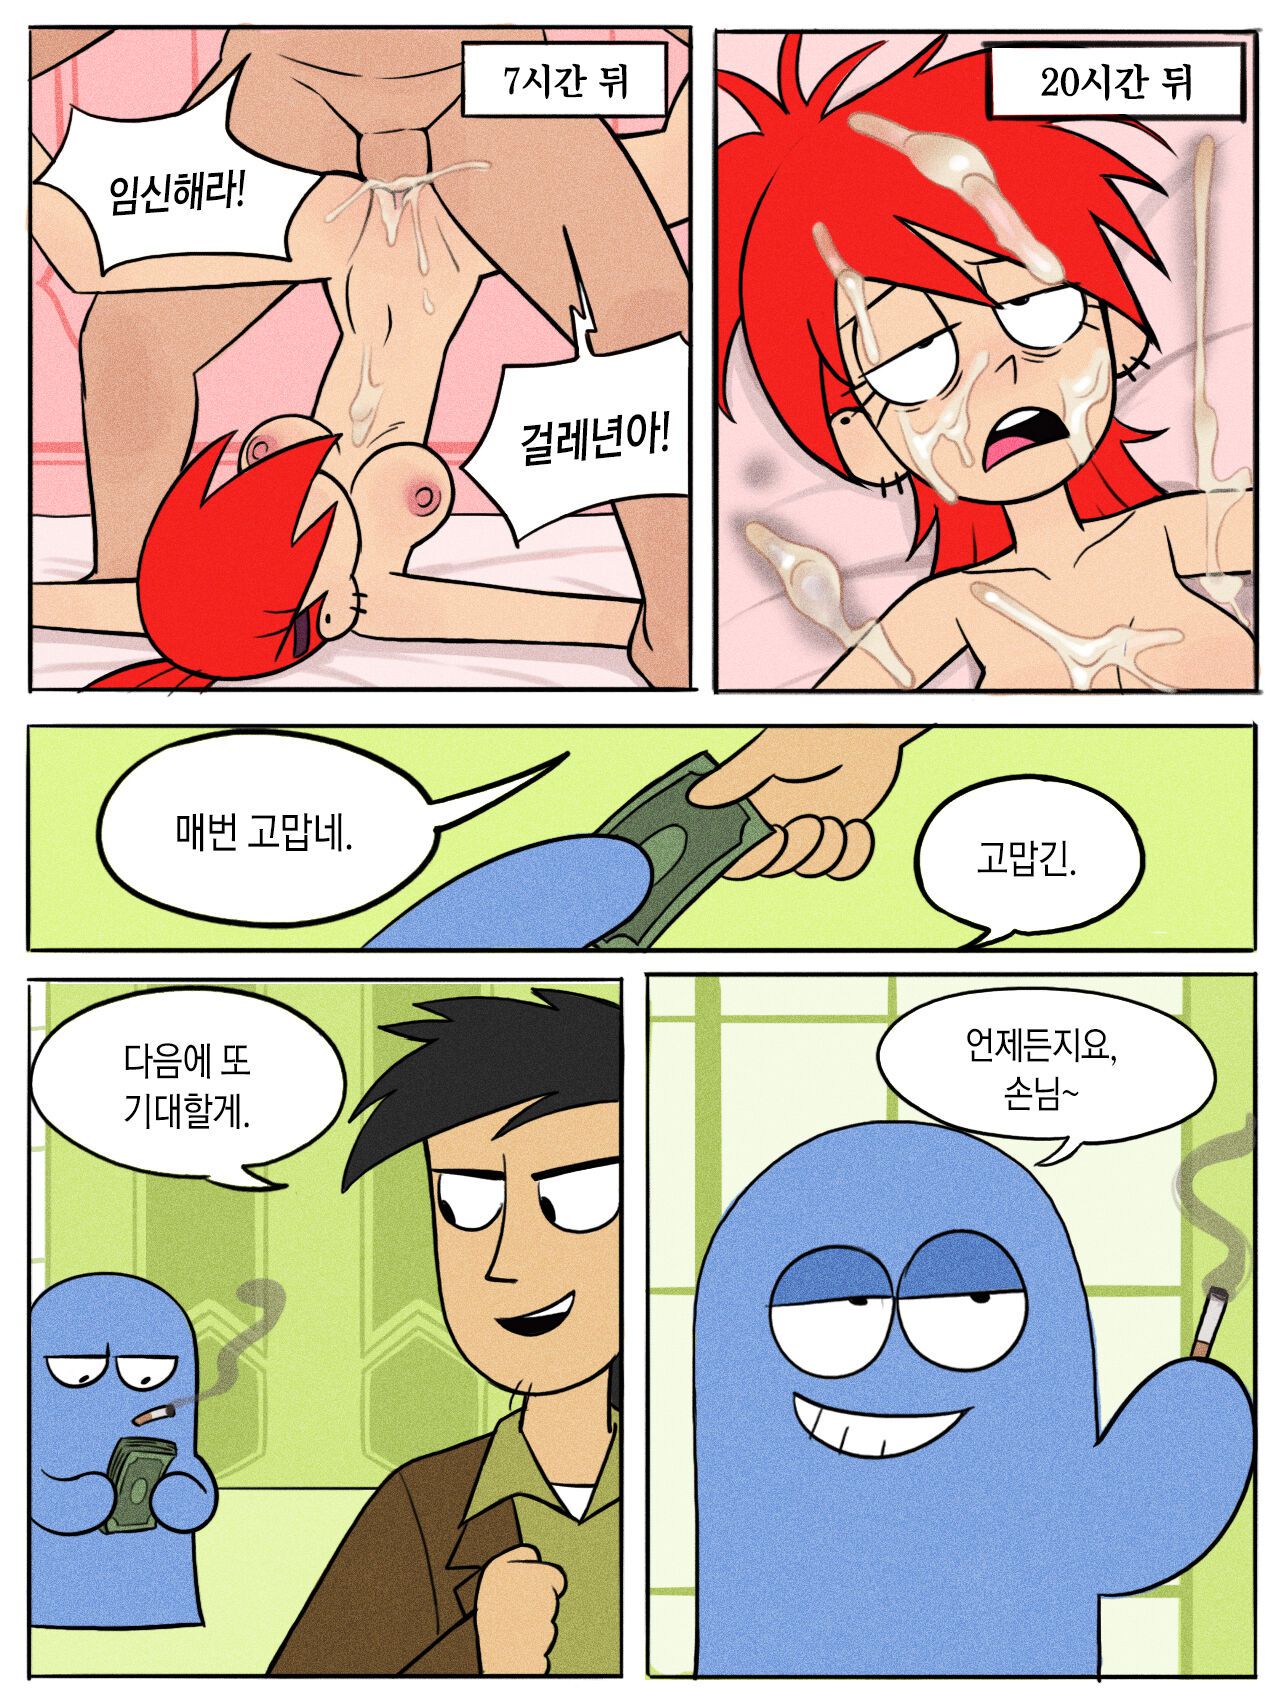 [Mangamaster] Frankie Foster (Foster's Home For Imaginary Friends) [Korean] 4